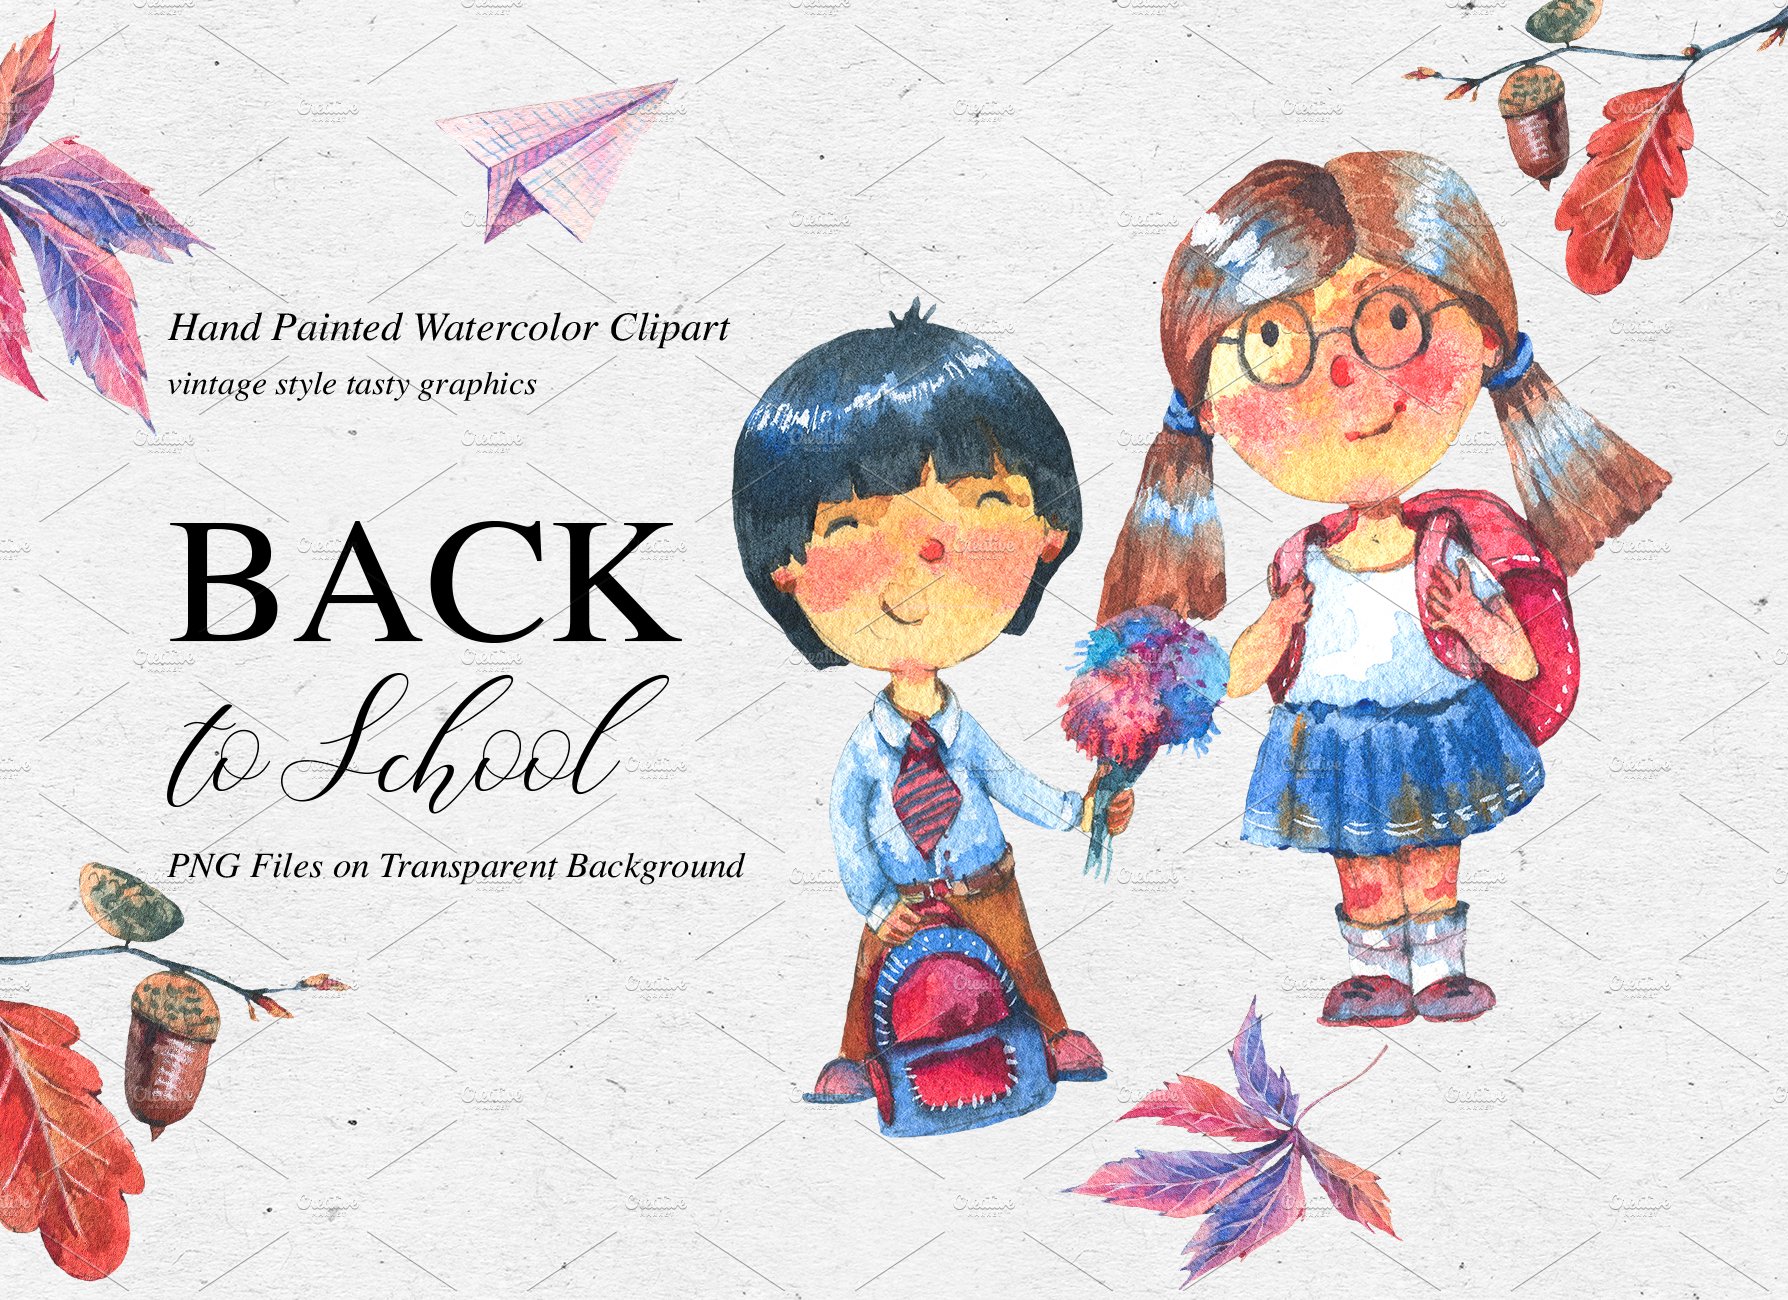 Back to school, watercolor kit cover image.